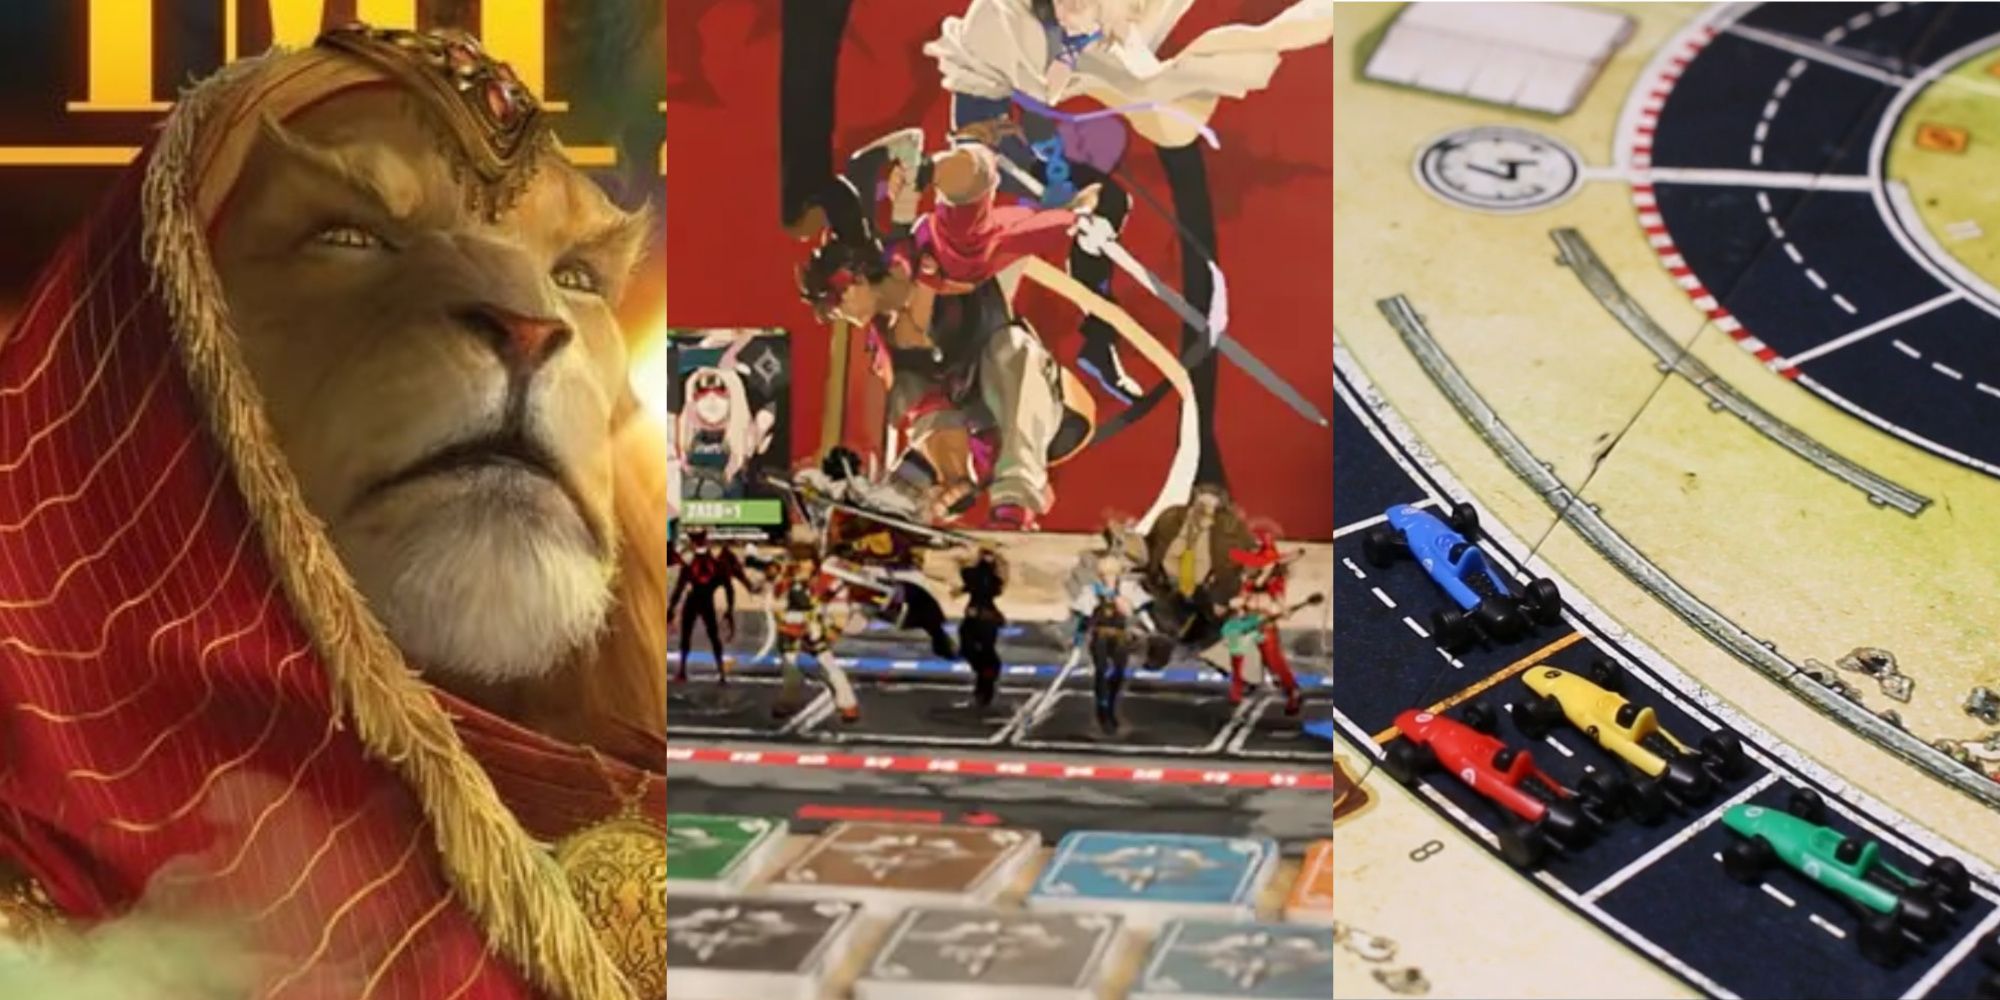 Collage image of board games Exceed, Twilight Imperium, and Pedal To The Metal.